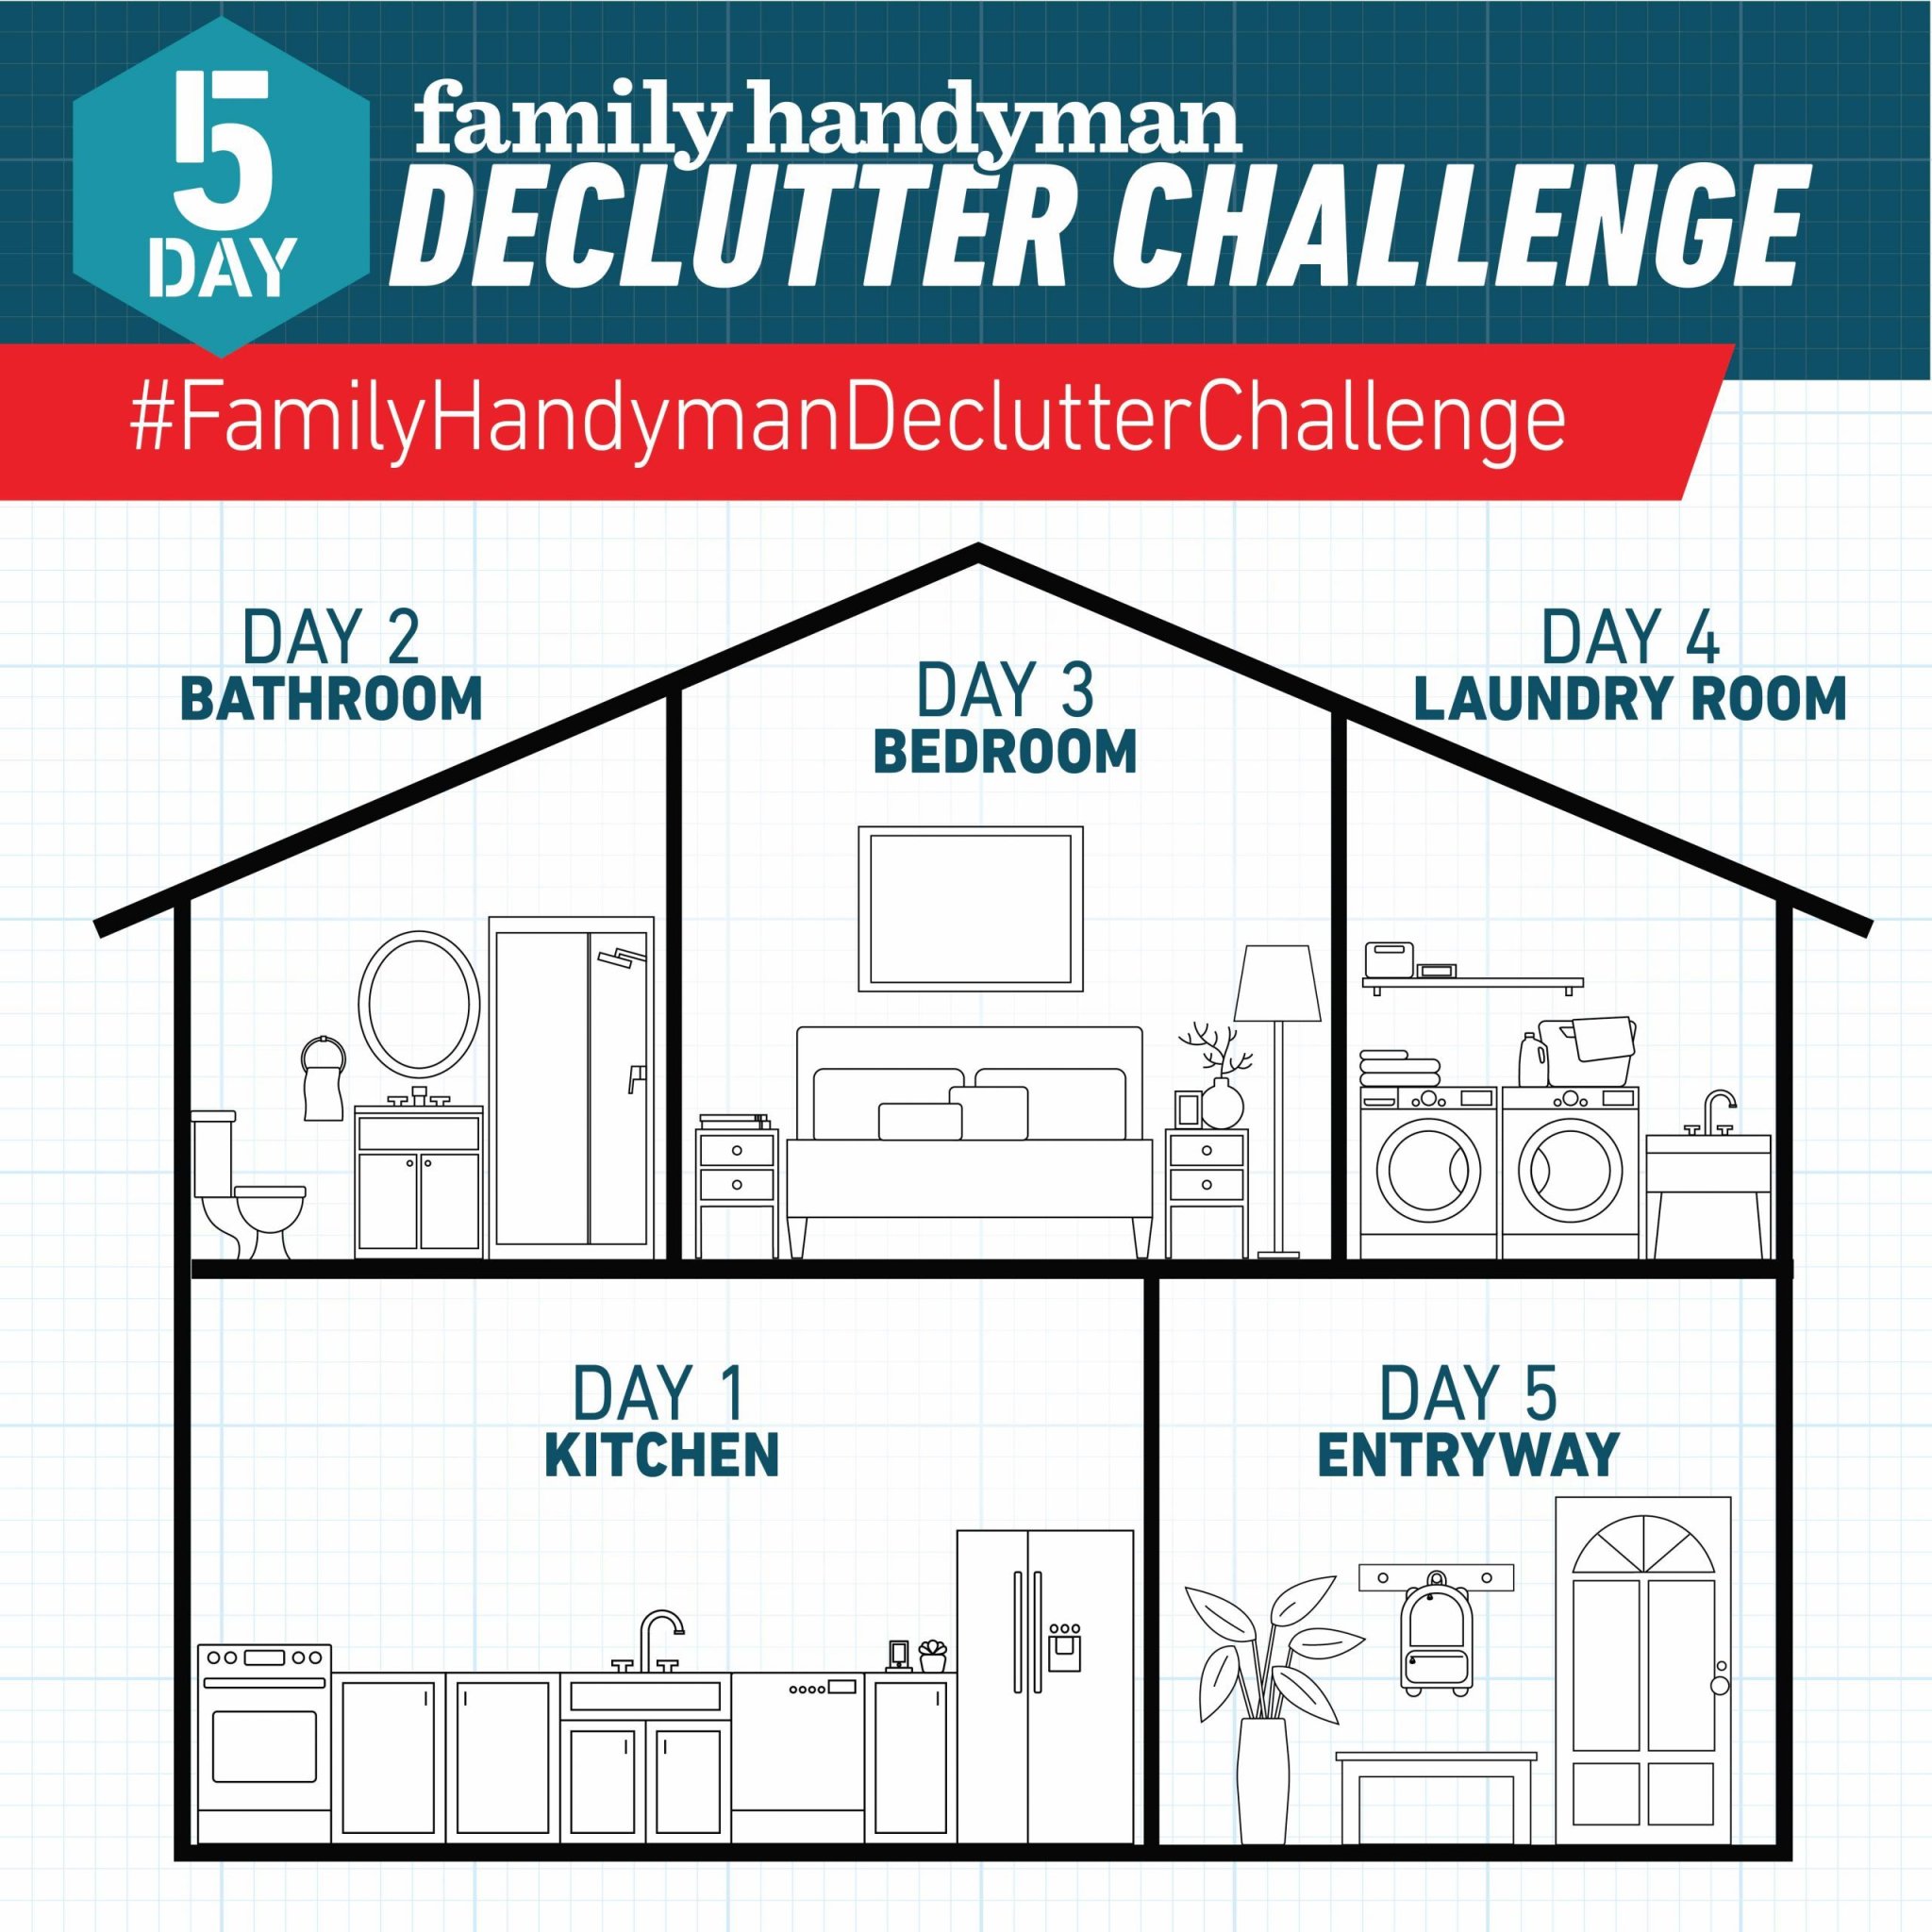 Welcome To the Family Handyman 5-Day Declutter Challenge!